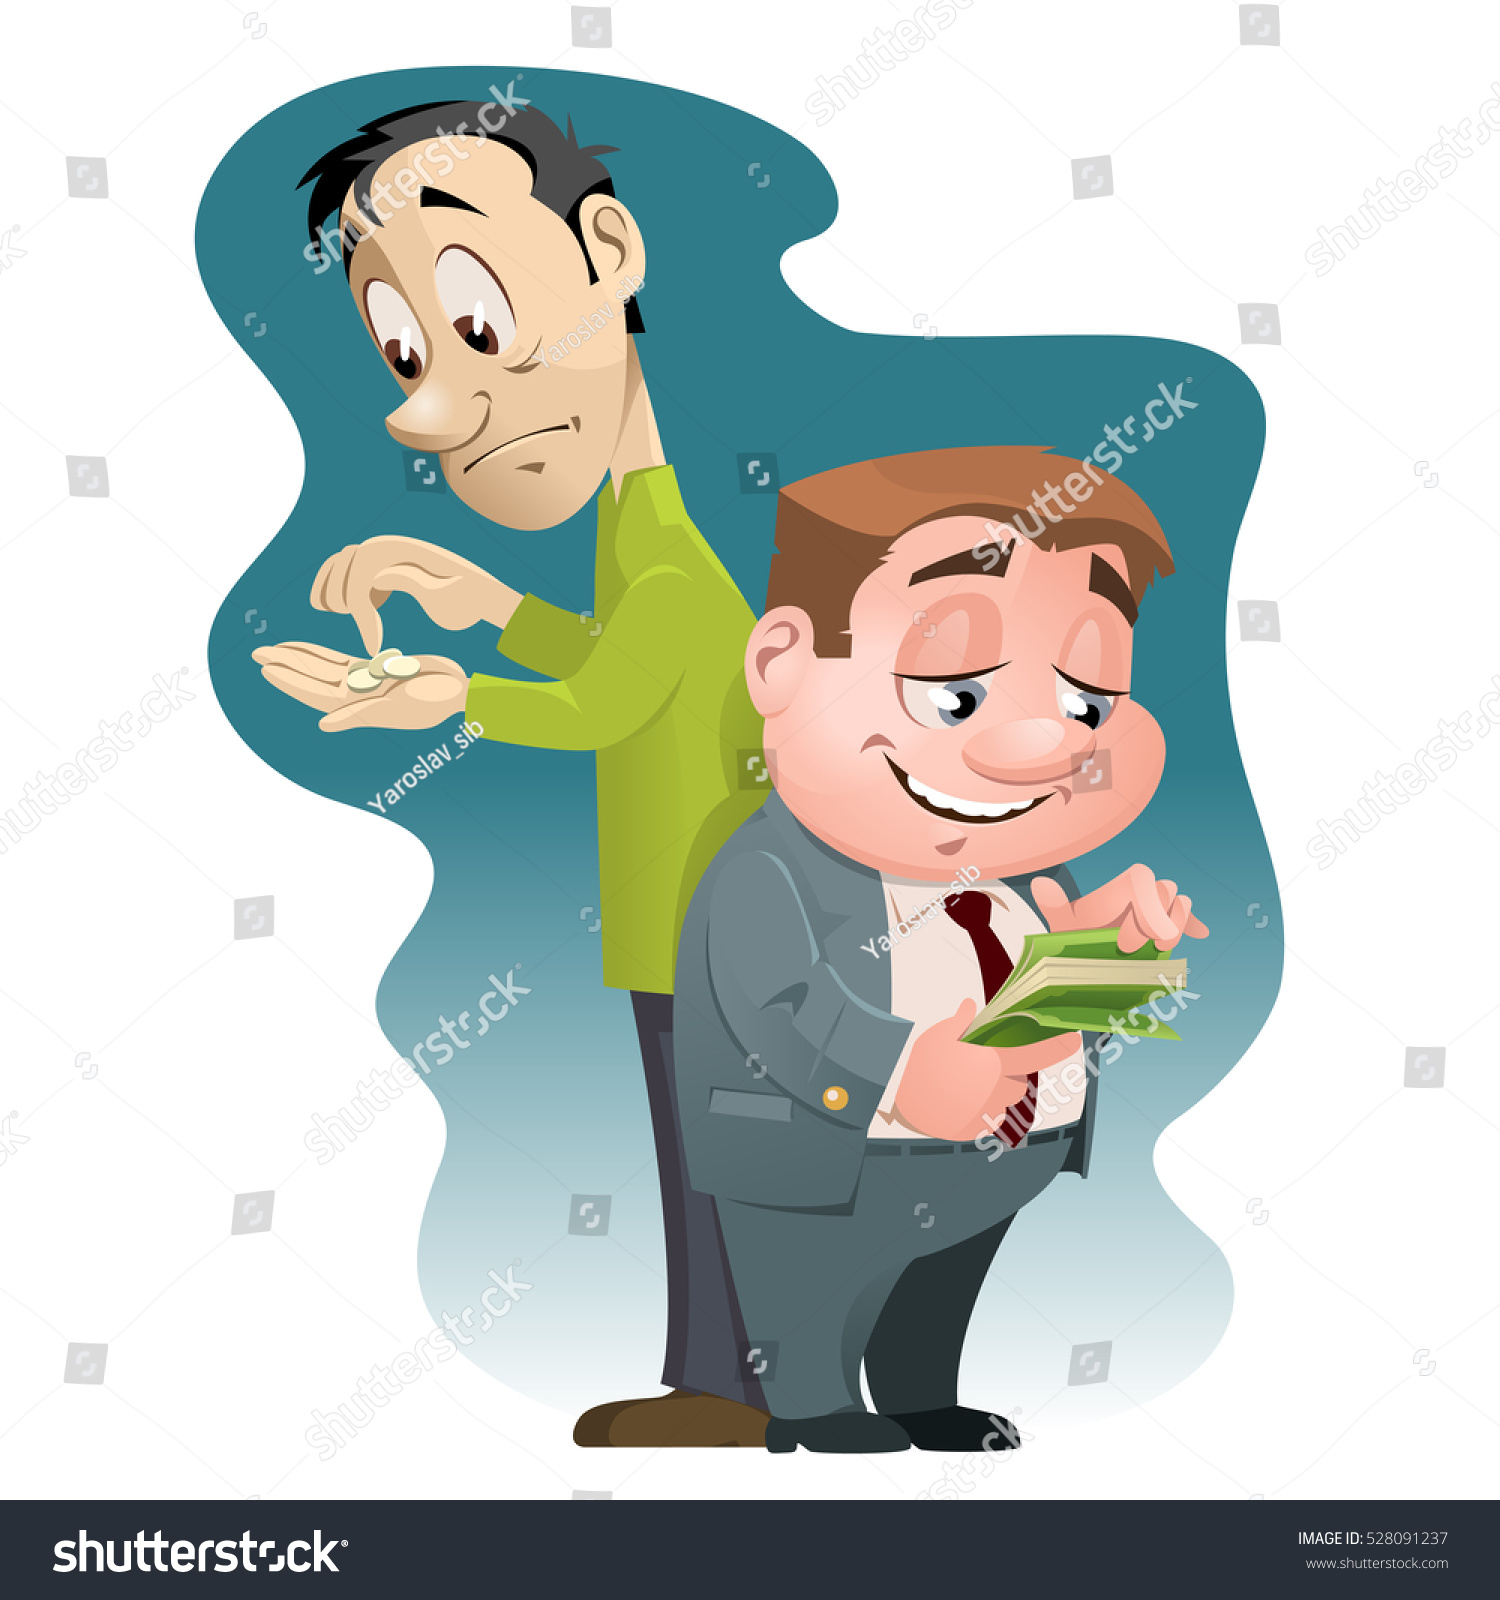 Inequality Wealth Rich Man Poor Man Stock Vector Royalty Free